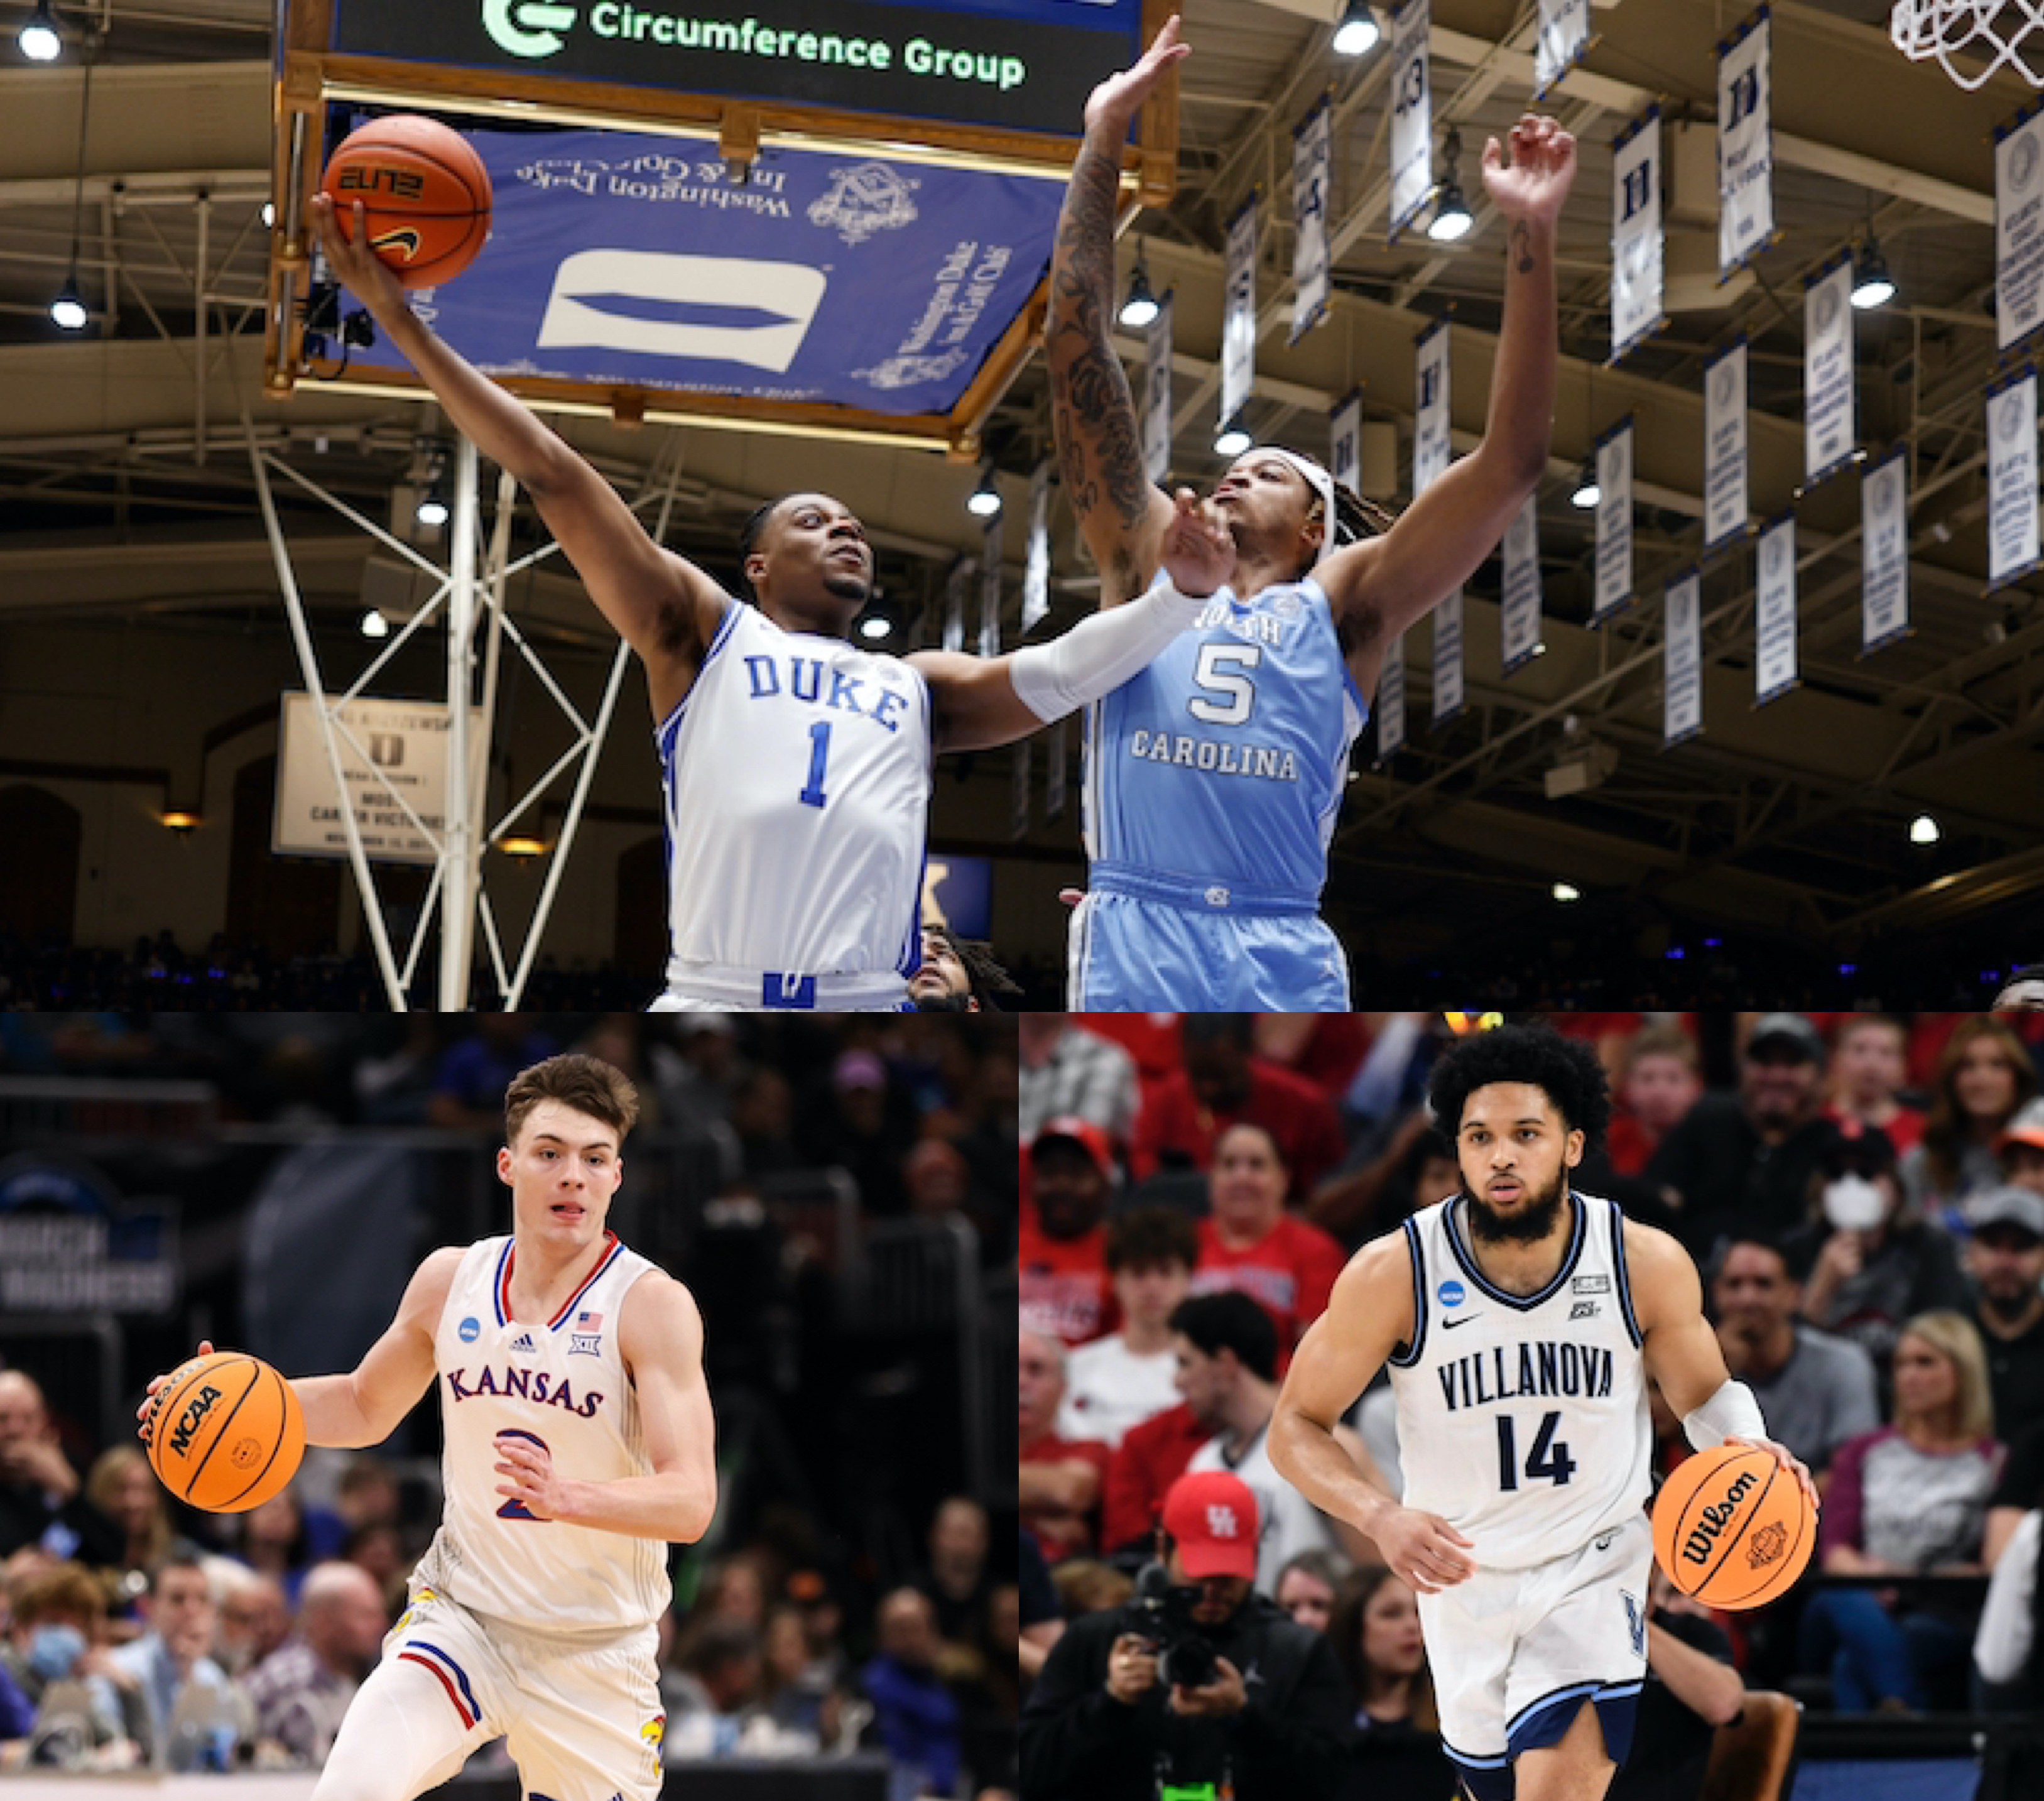 Final Four 2022 schedule, TV channel, times for Villanova vs Kansas, Duke vs UNC and how to watch NCAA Tournament live stream online